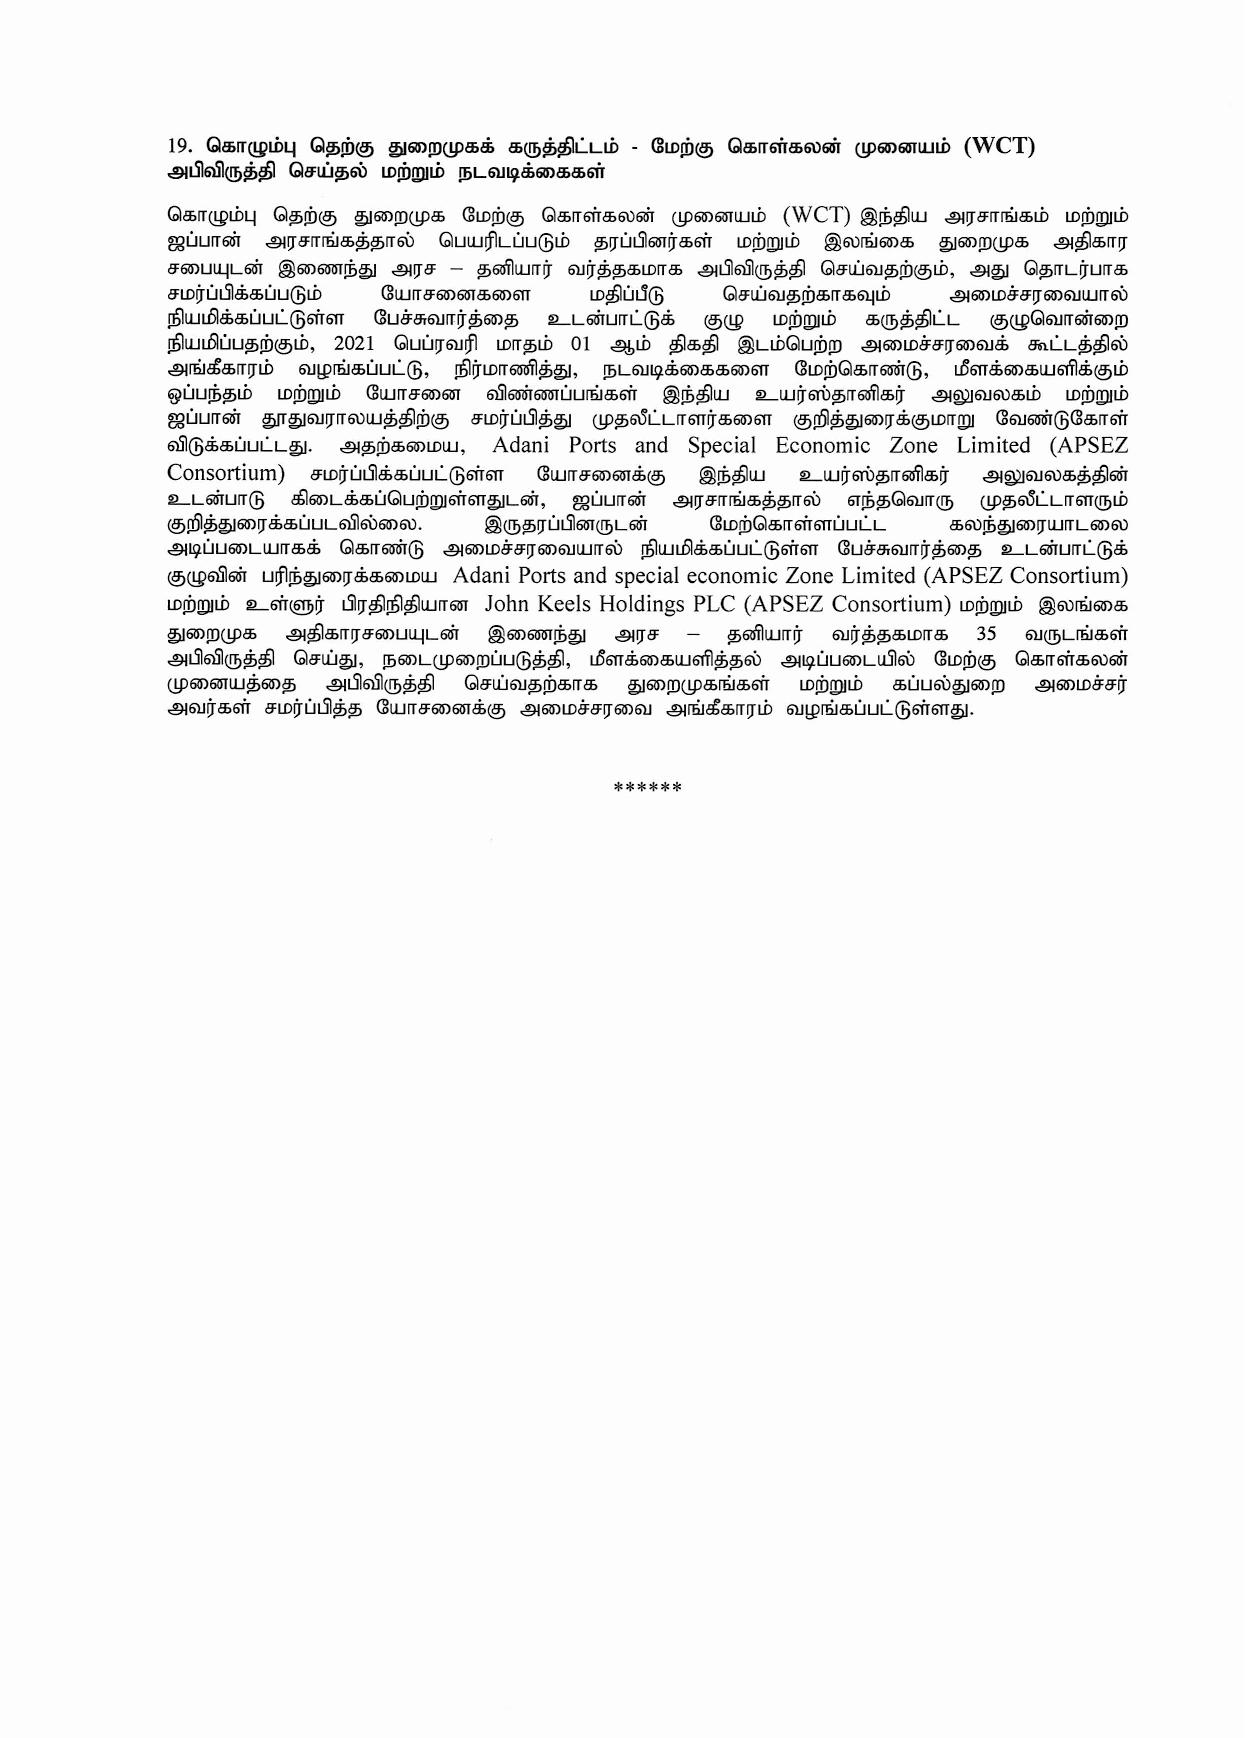 Cabinet Decision on 01.03.2021 Tamil page 006